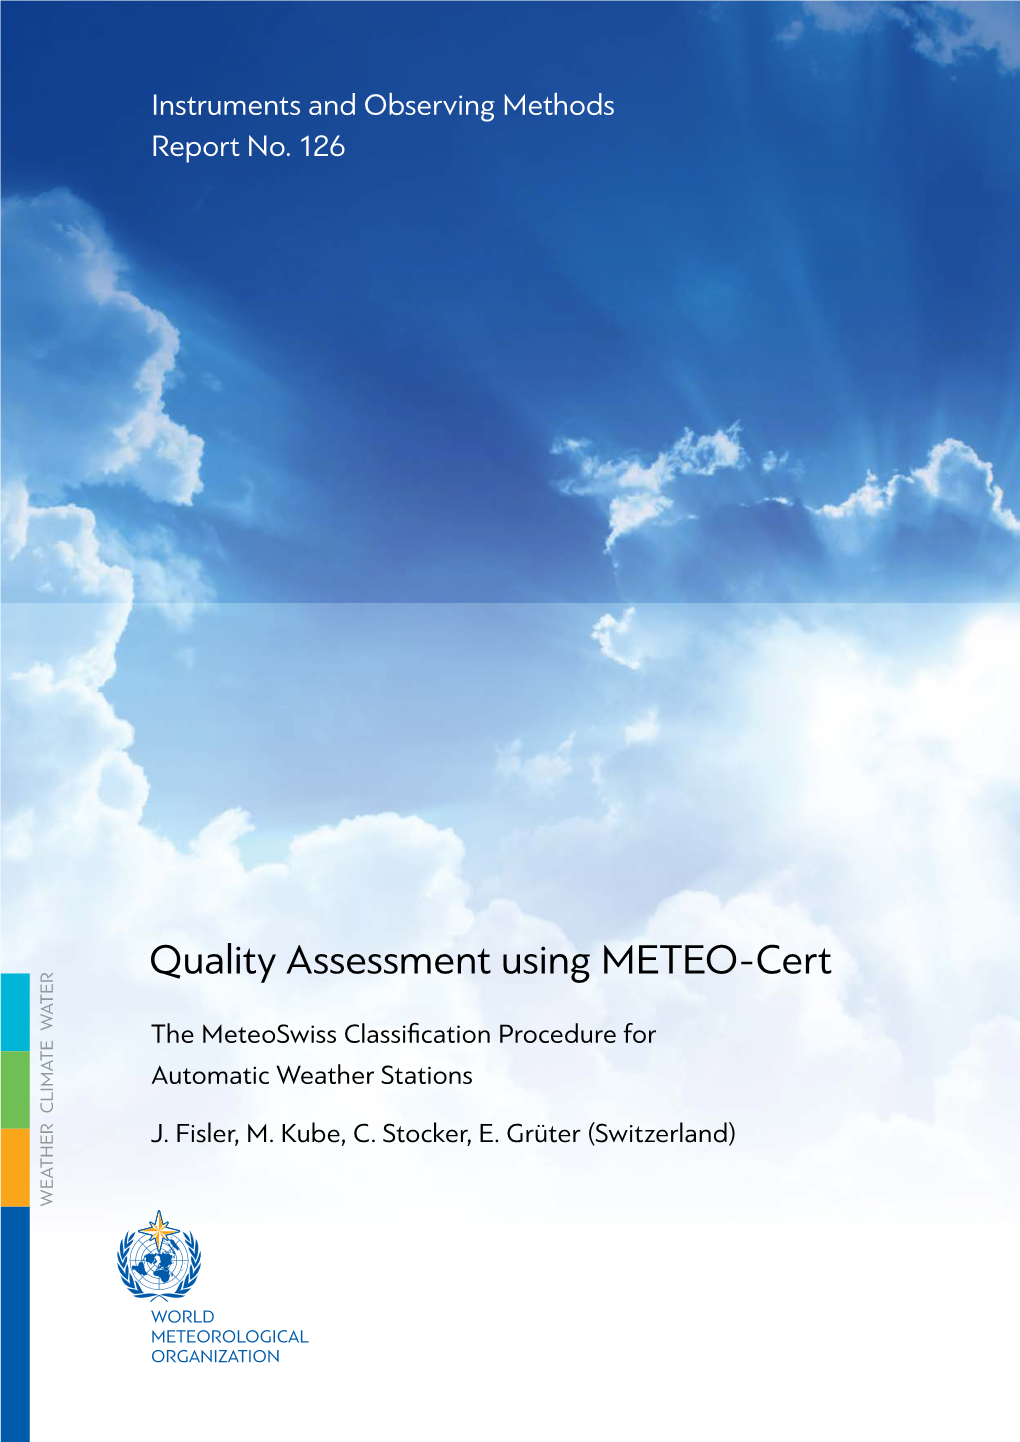 Quality Assessment Using METEO-Cert – the Meteoswiss Classification Procedure for Automatic